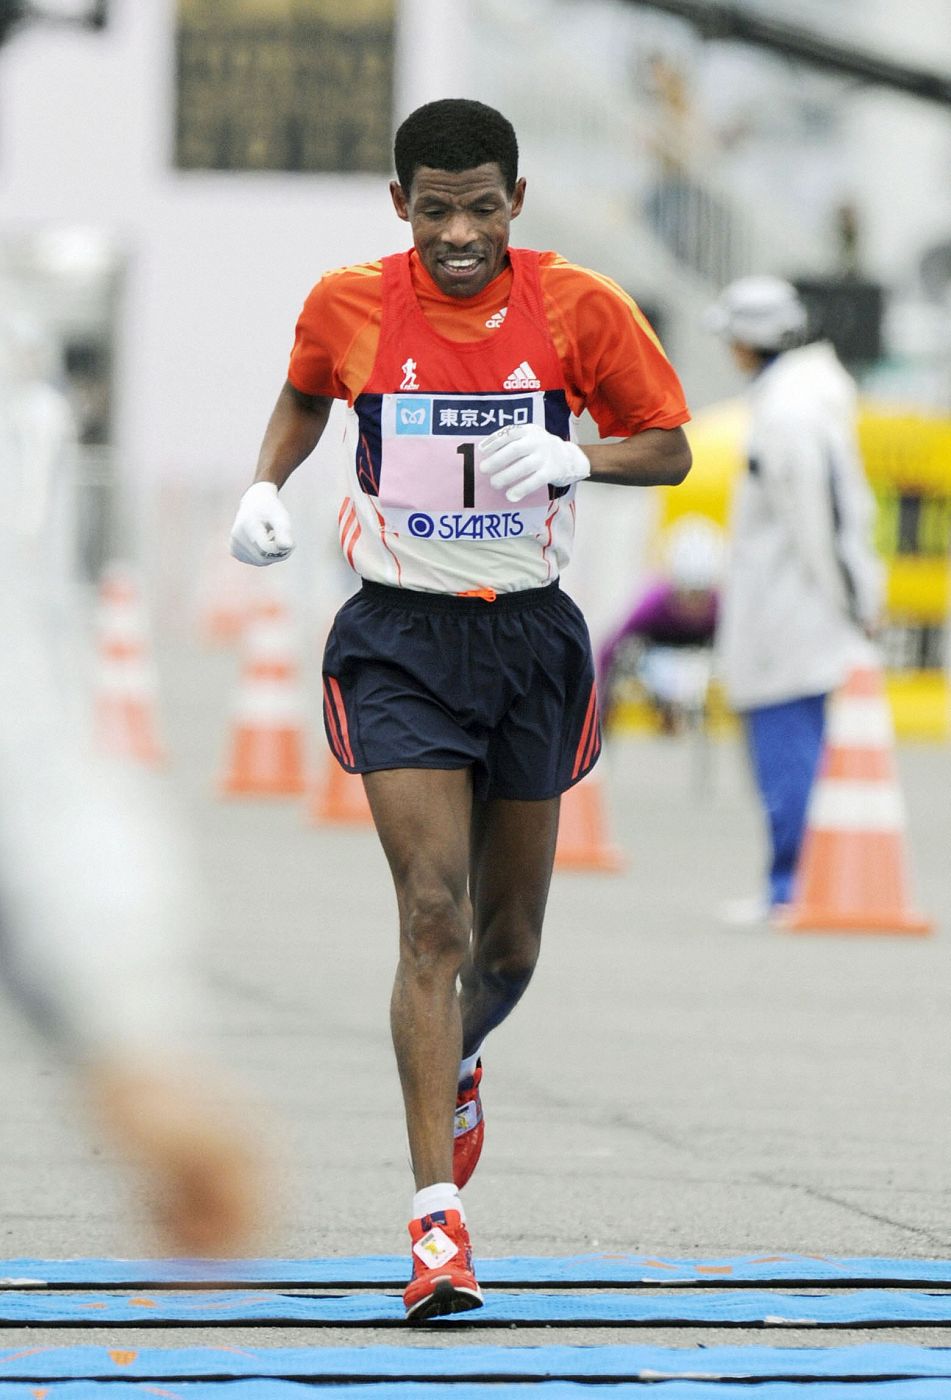 Gebrselassie of Ethiopia crosses the finish line in fourth place at the men's race of the Tokyo Marathon in Tokyo